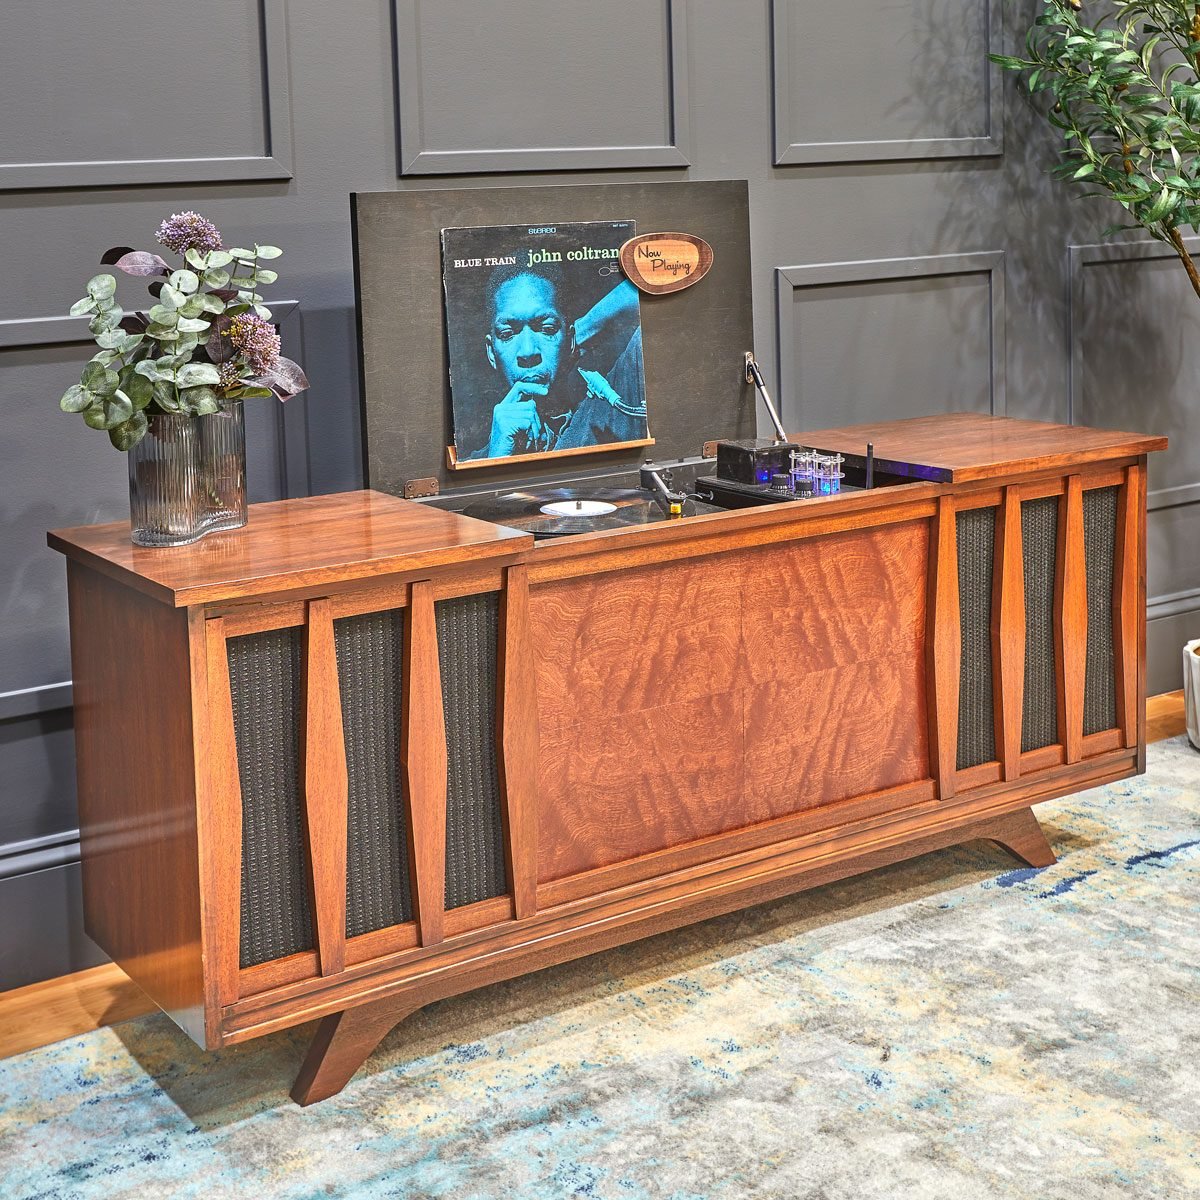 How to Restore a Vintage Console Stereo (DIY) | Family Handyman